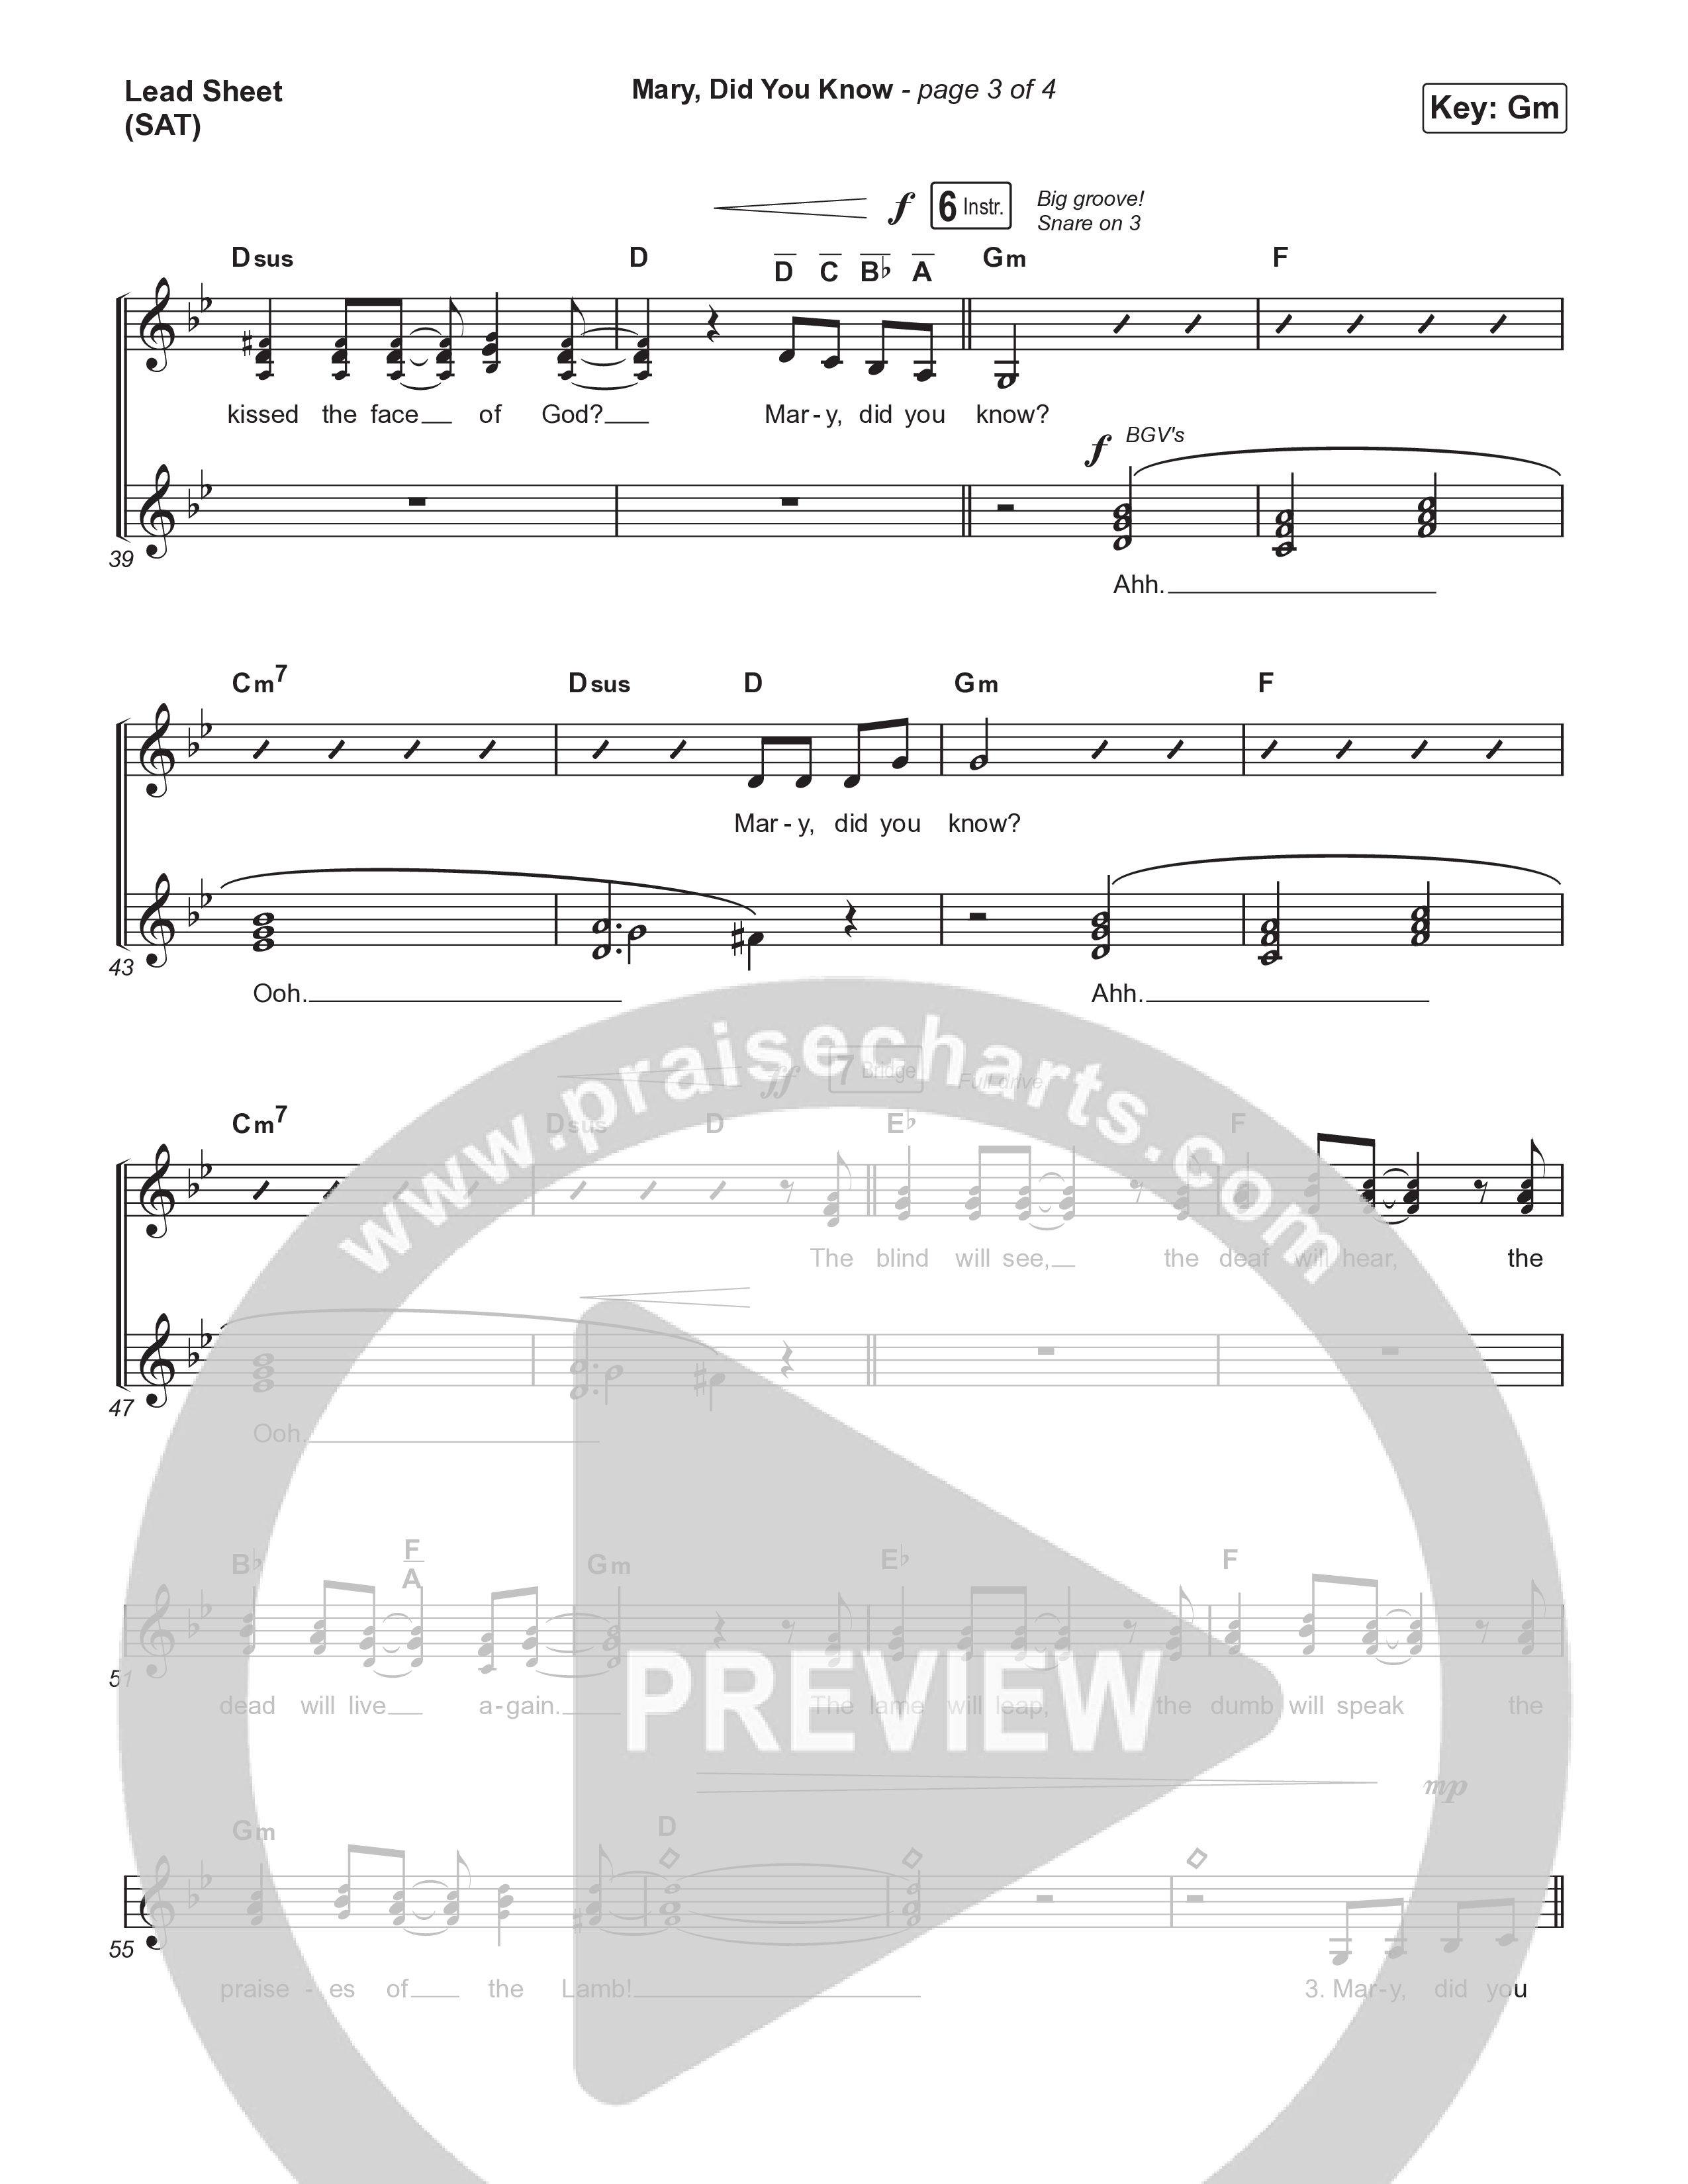 Mary Did You Know (Choral Anthem SATB) Lead Sheet (SAT) (Anne Wilson / Arr. Luke Gambill)